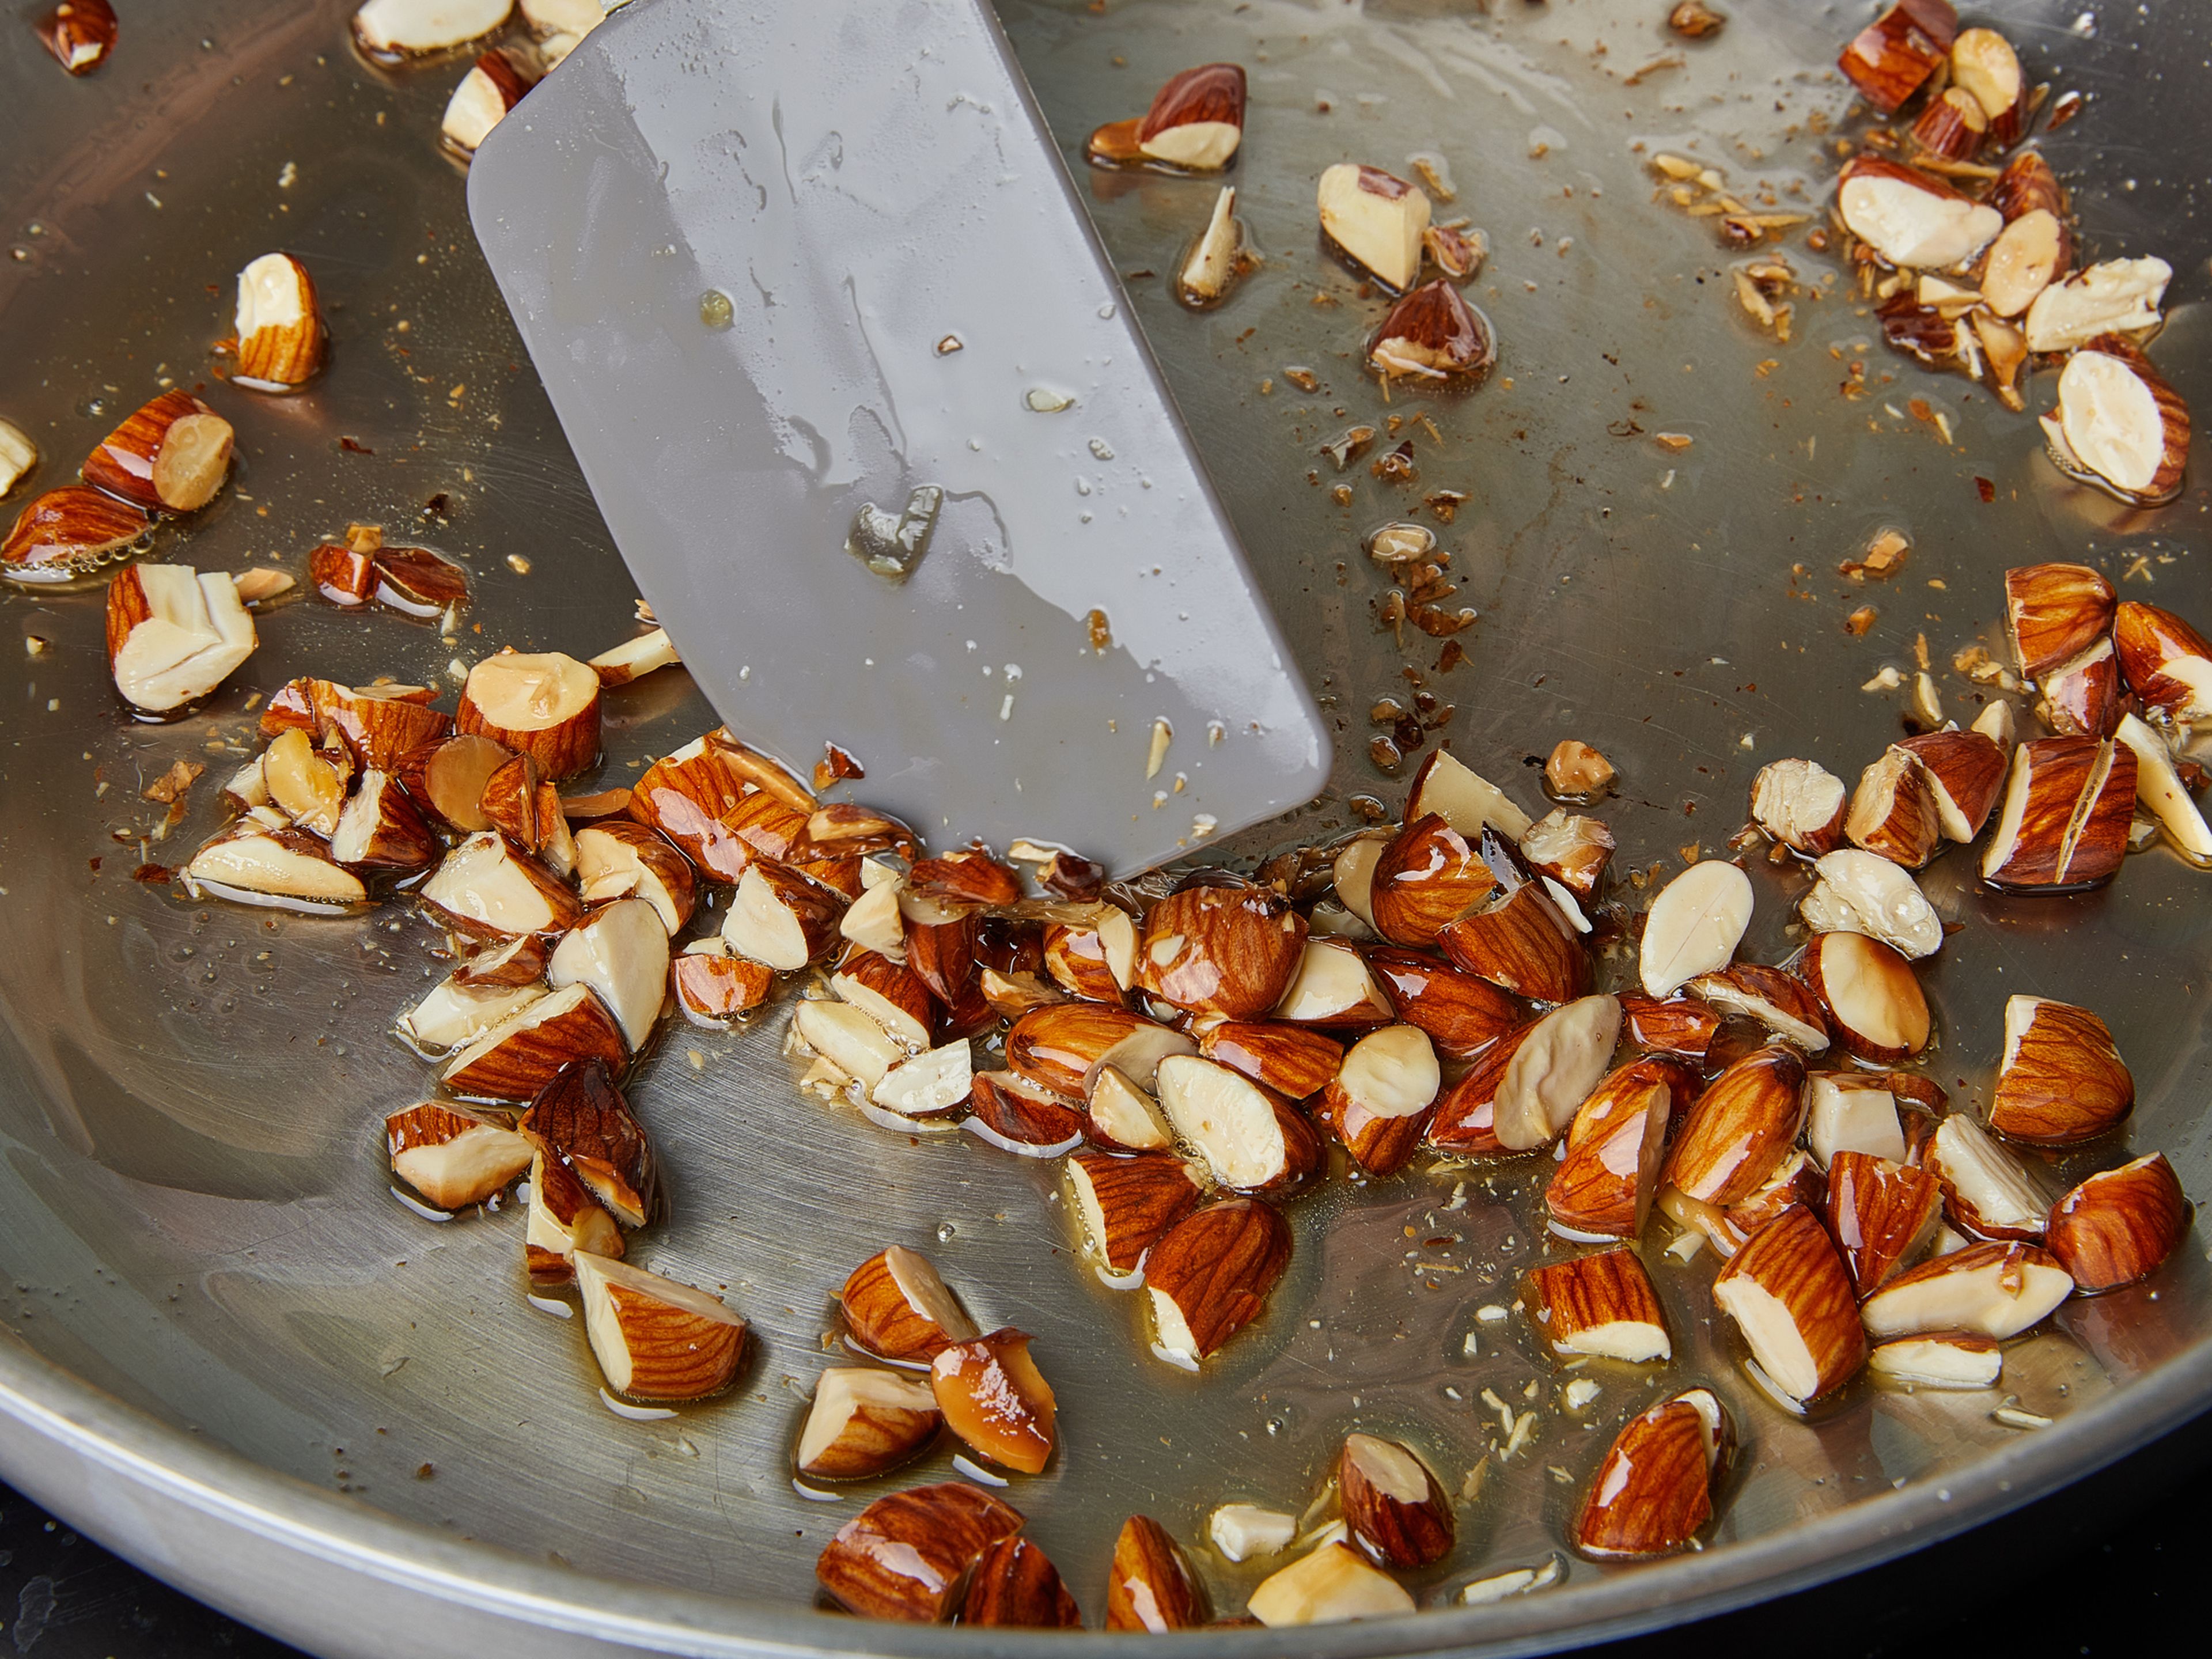 Add remaining olive oil to the pan and add almonds once hot. Fry until golden brown, watch closely, remove from heat and add to a small bowl. Season with salt and chilli flakes.